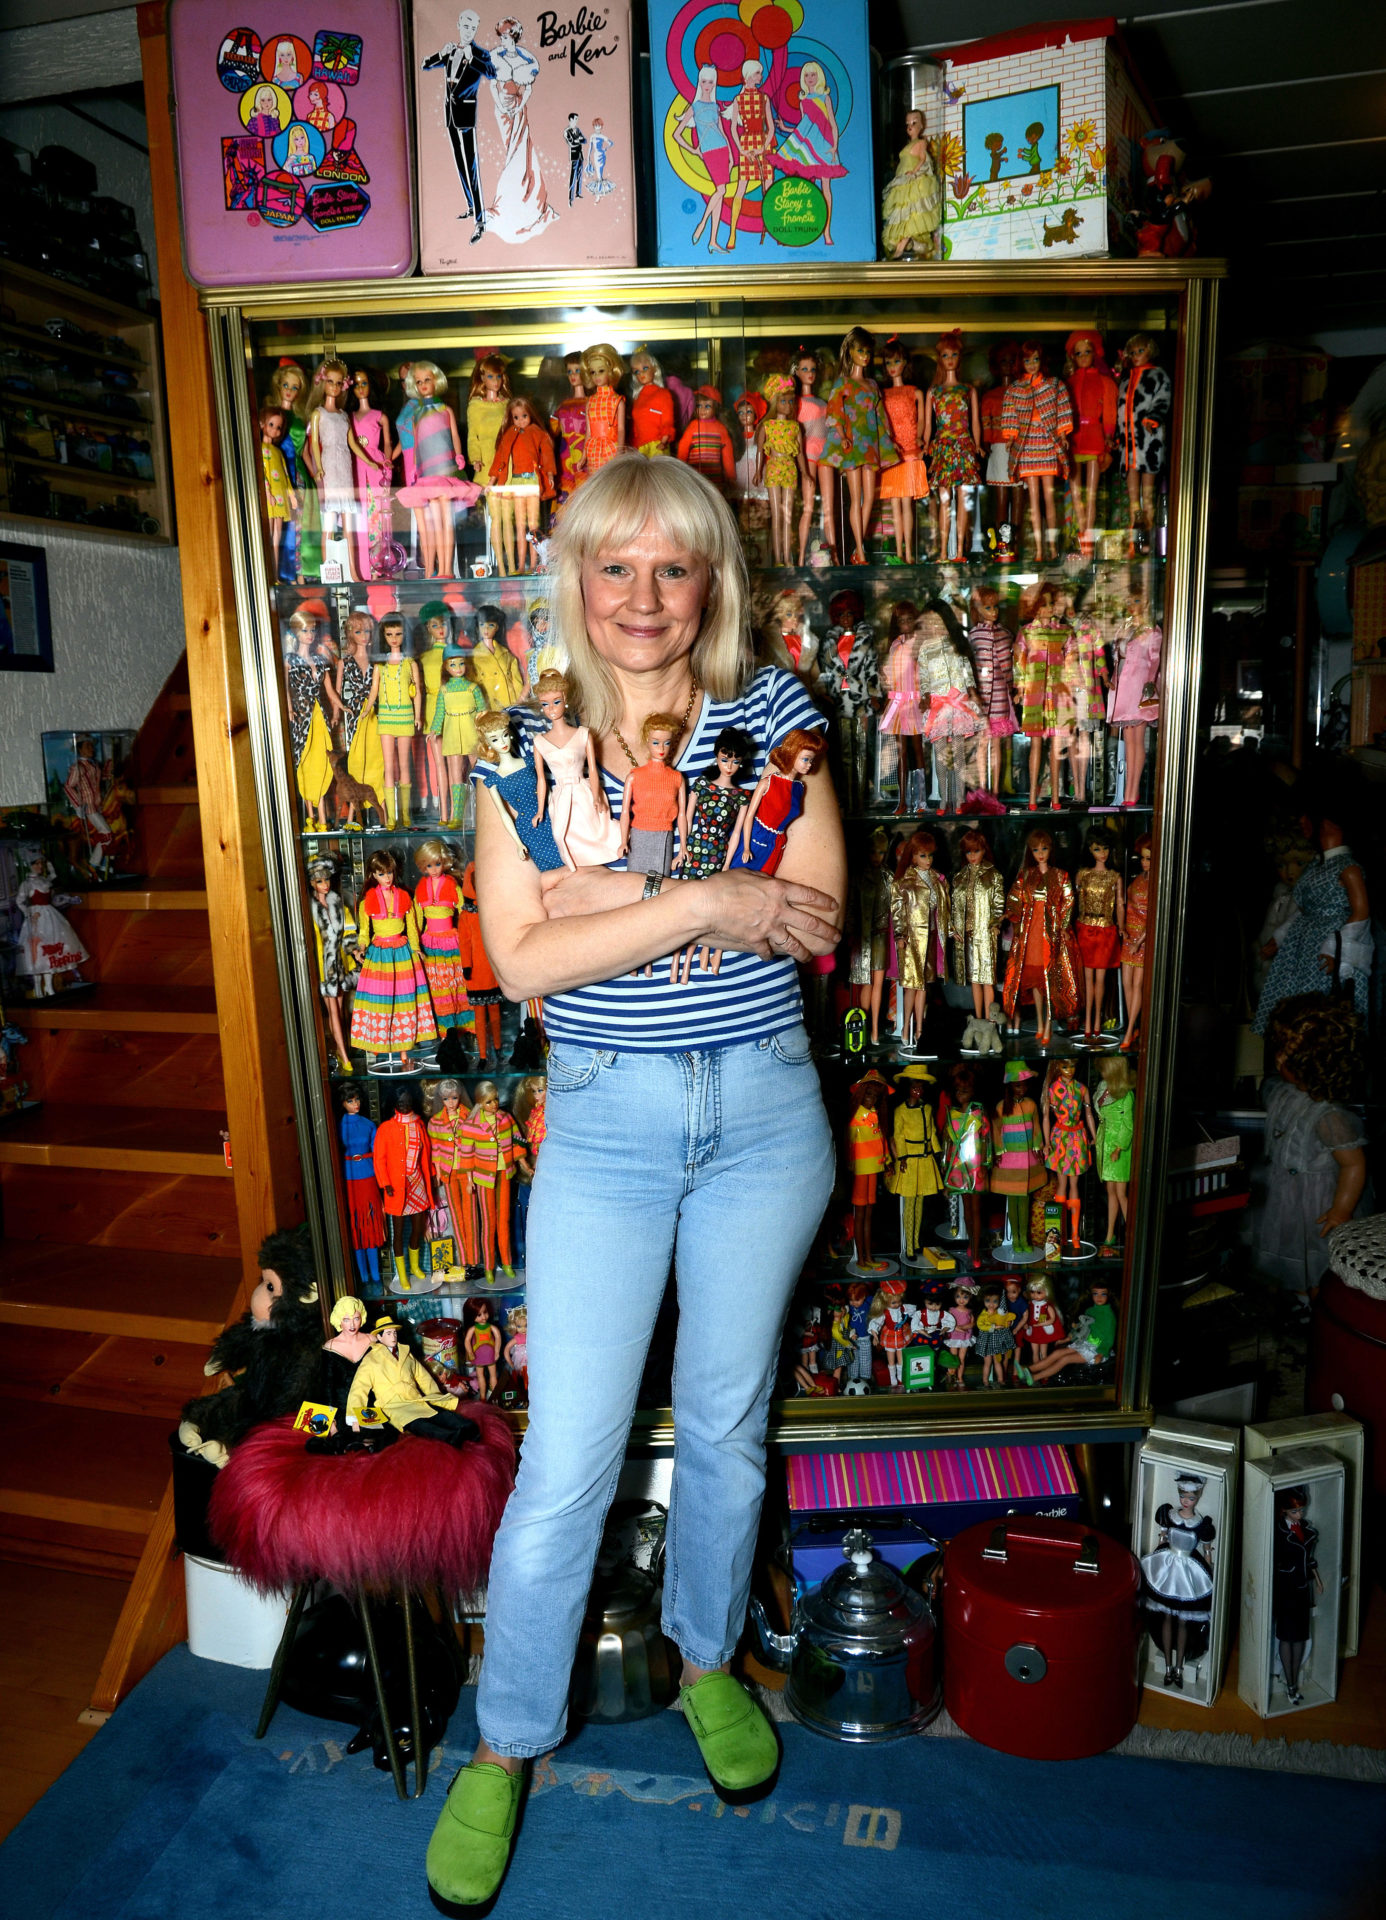 Barbie doll collector Bettina Dorfmann poses before her Barbie collection Duesseldorf, Germany in September 2014. 